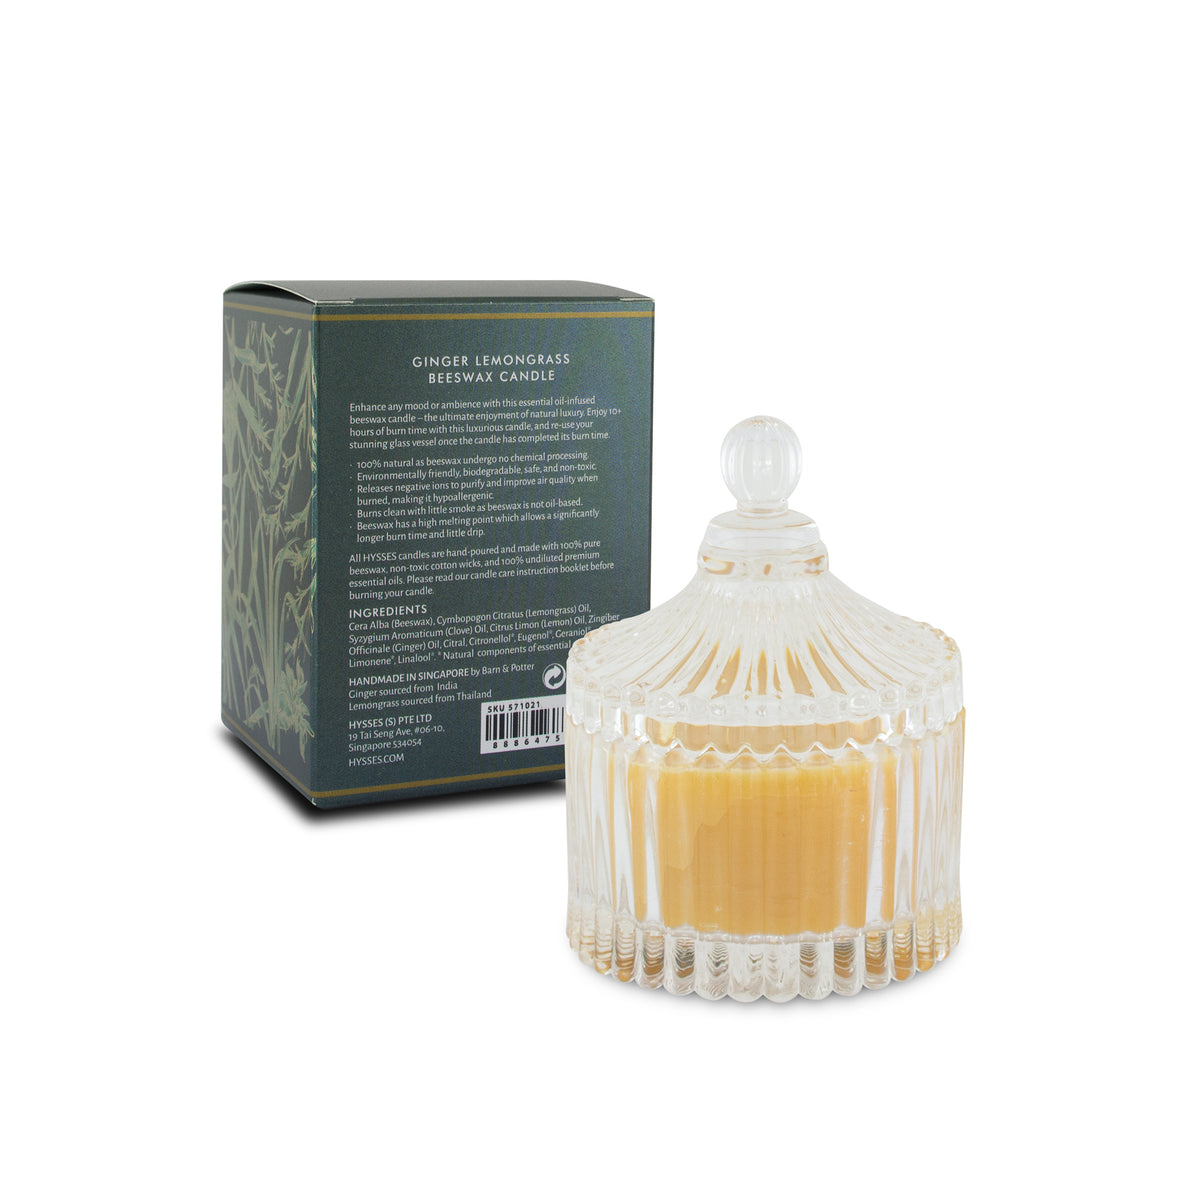 Ginger Lemongrass Beeswax Candle - HYSSES